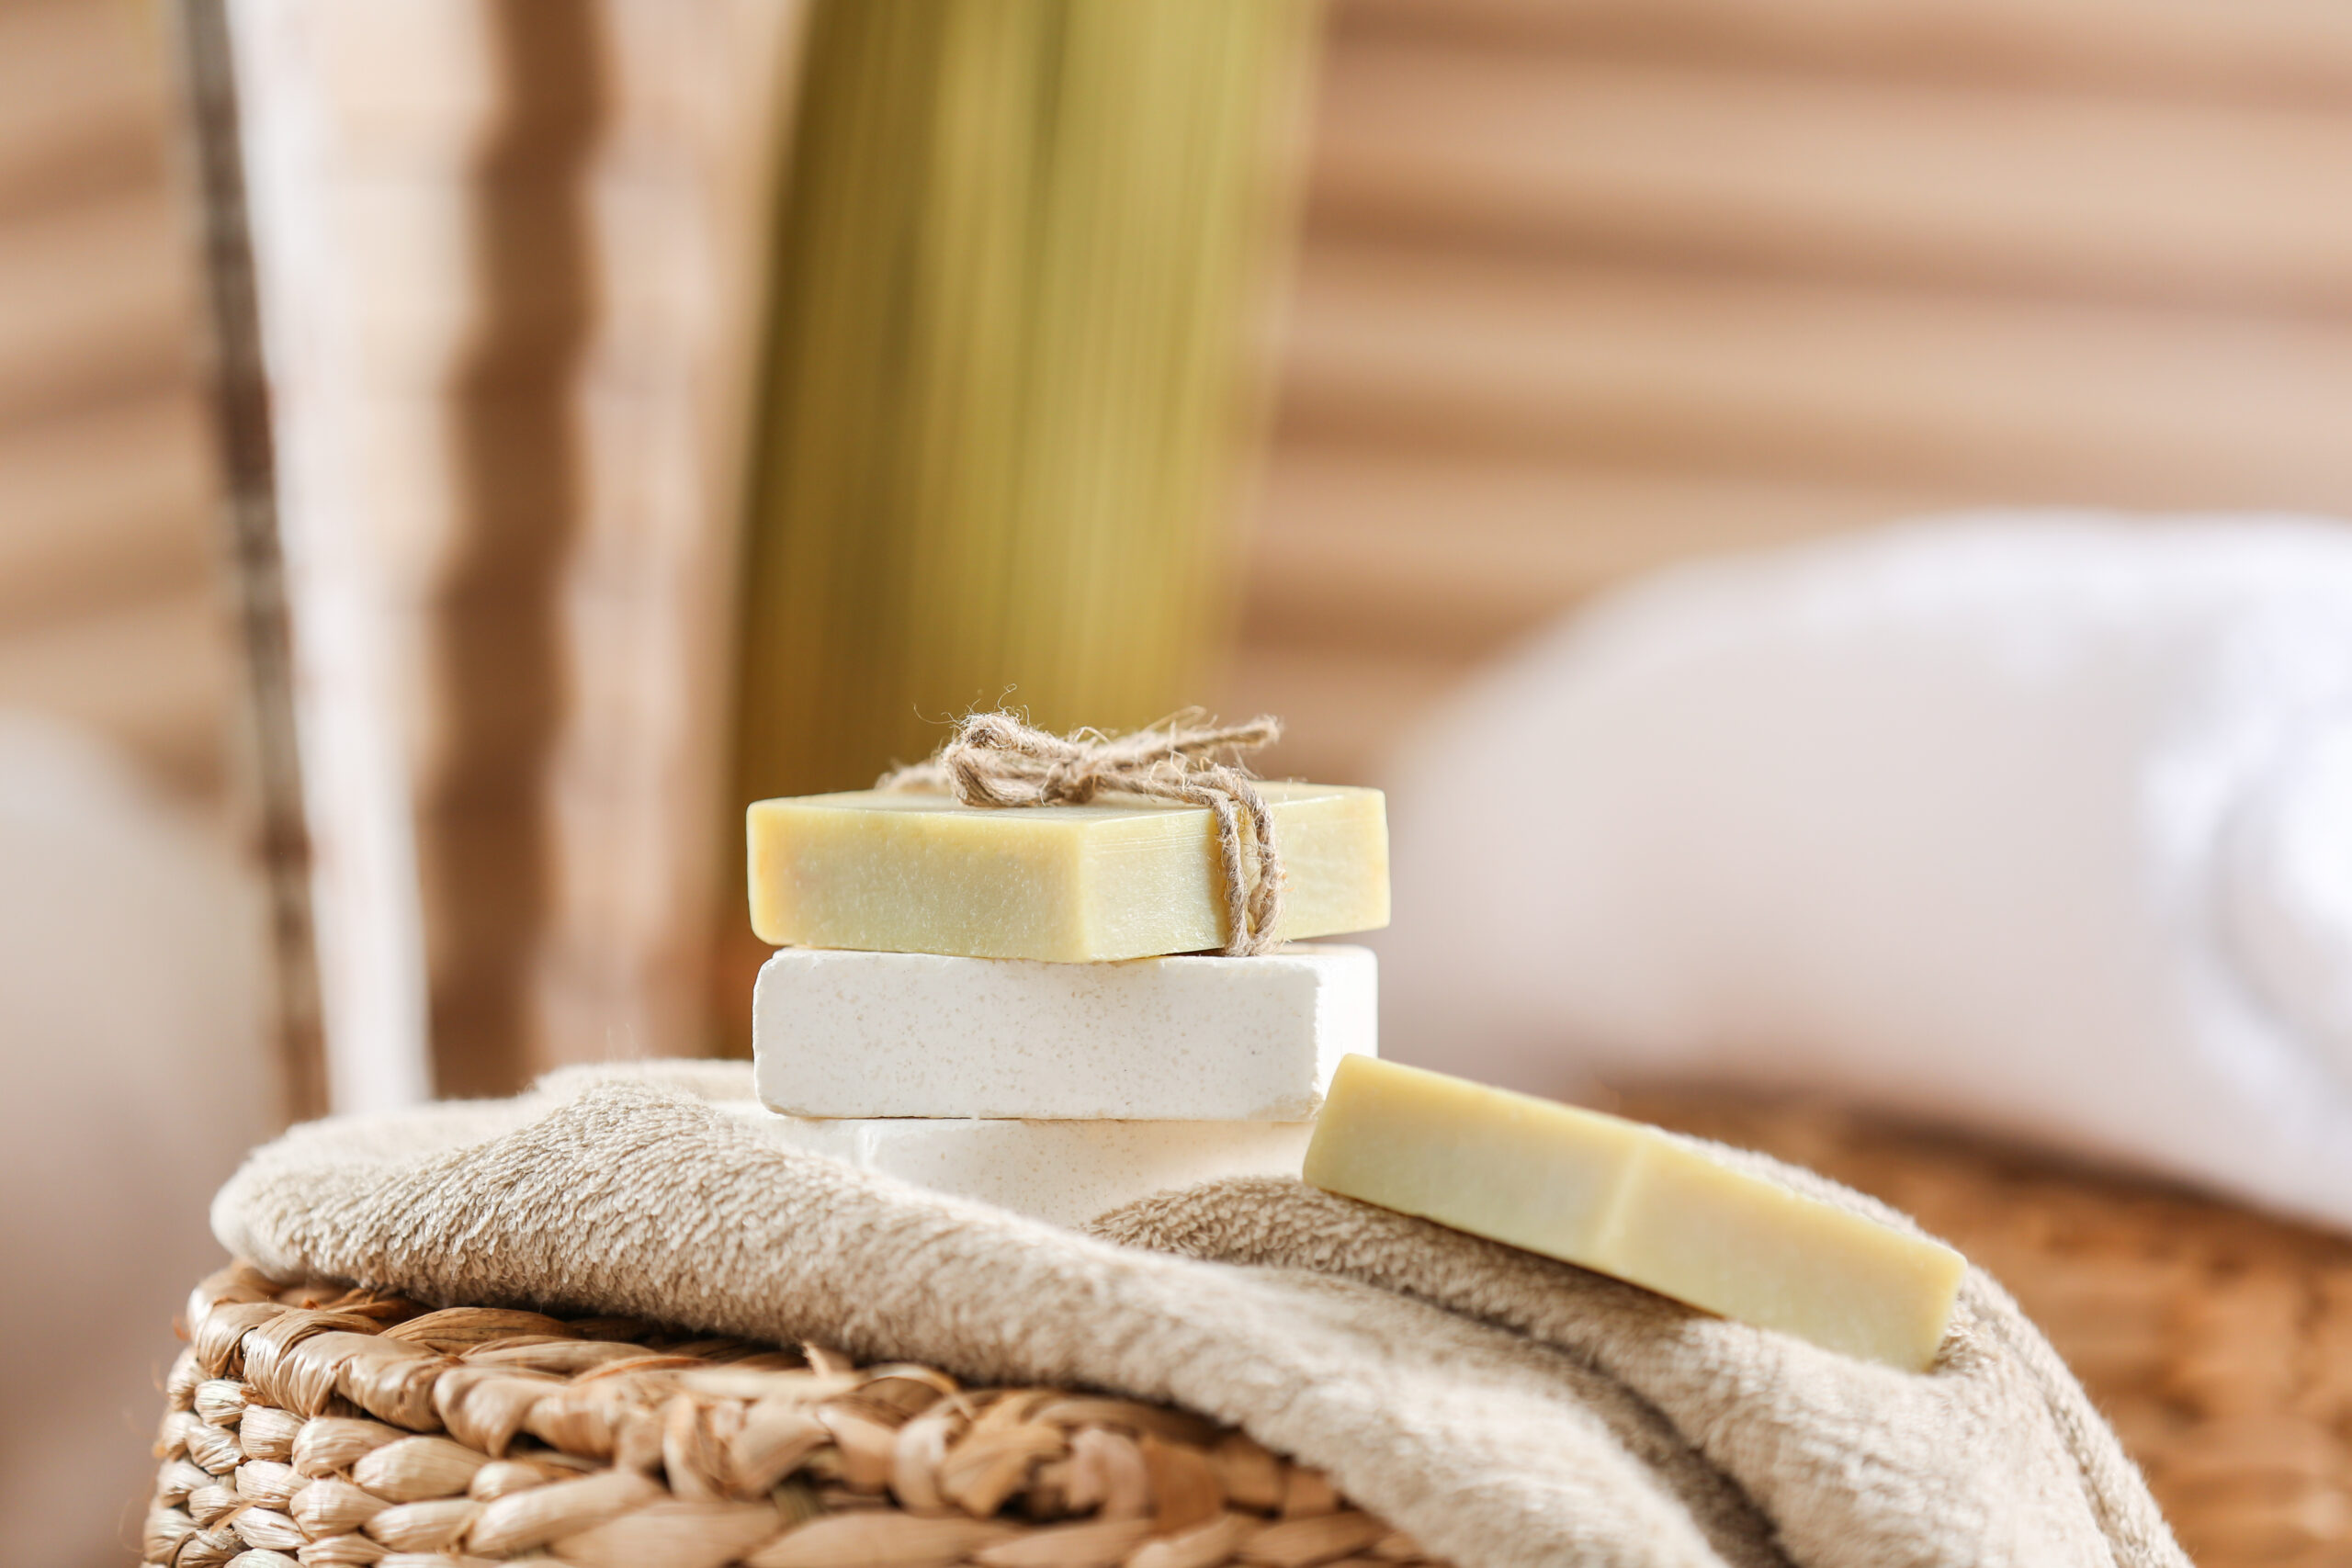 How To Choose The Best Soap For Your Skin Type